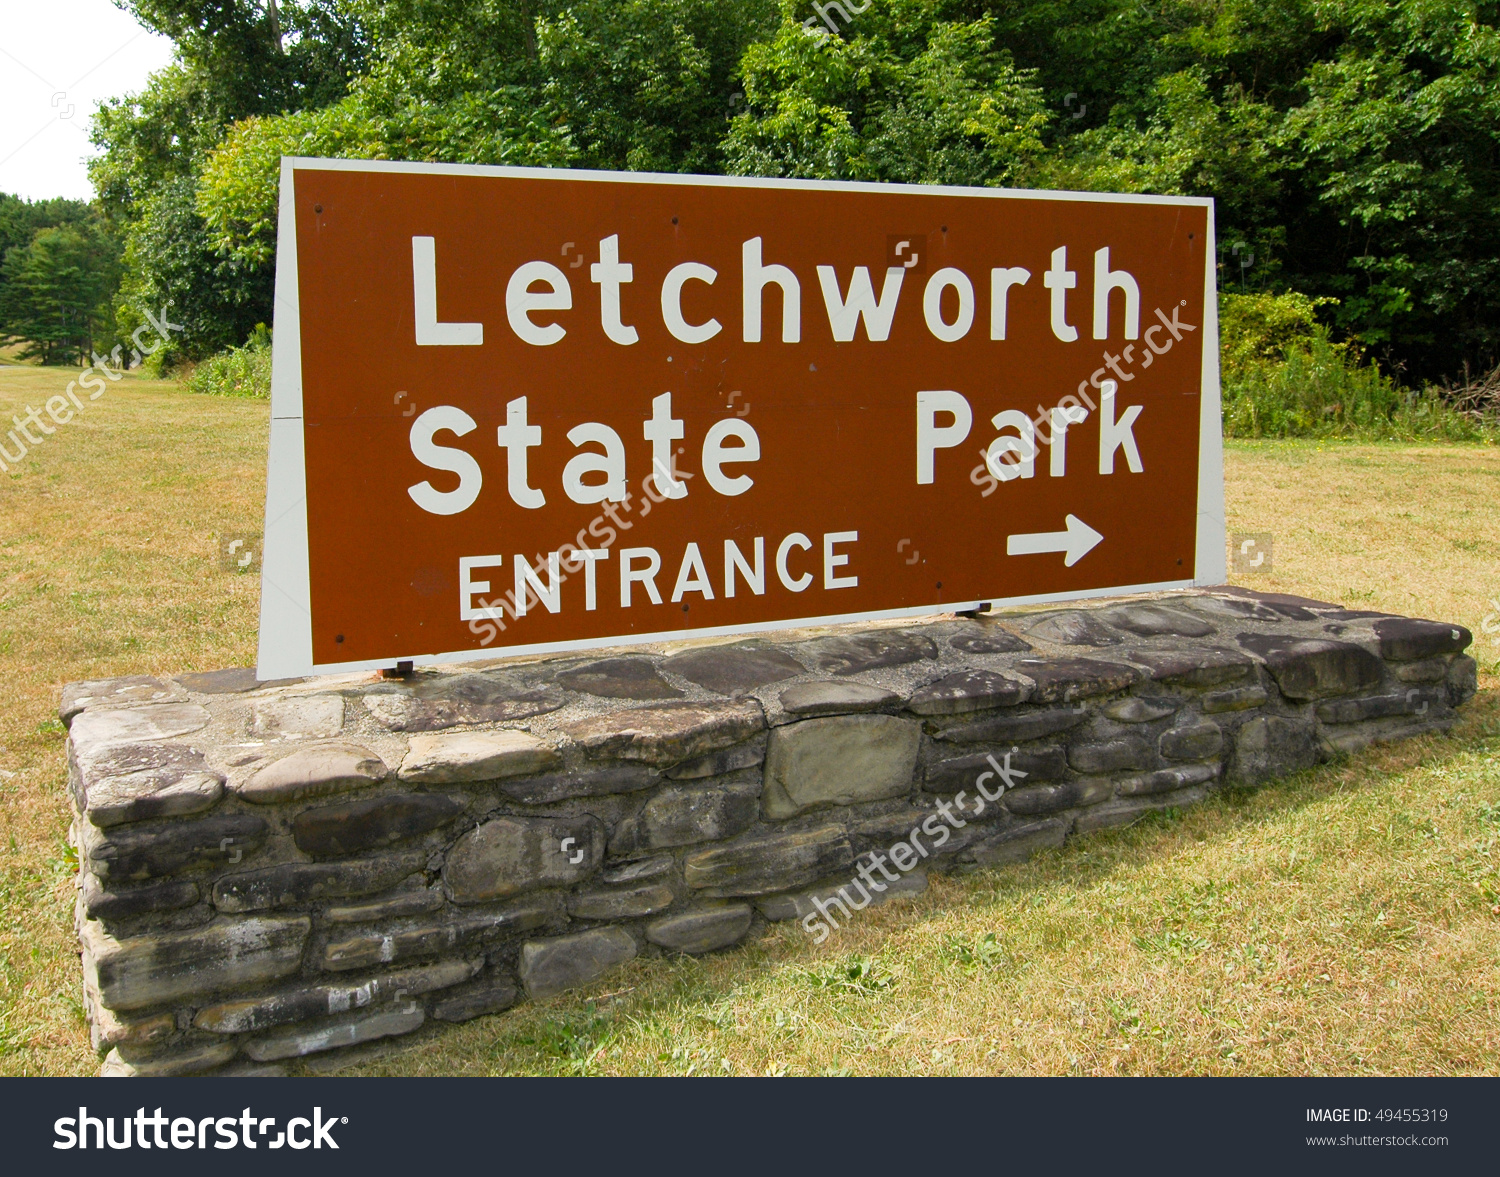 Letchworth State Park clipart #4, Download drawings